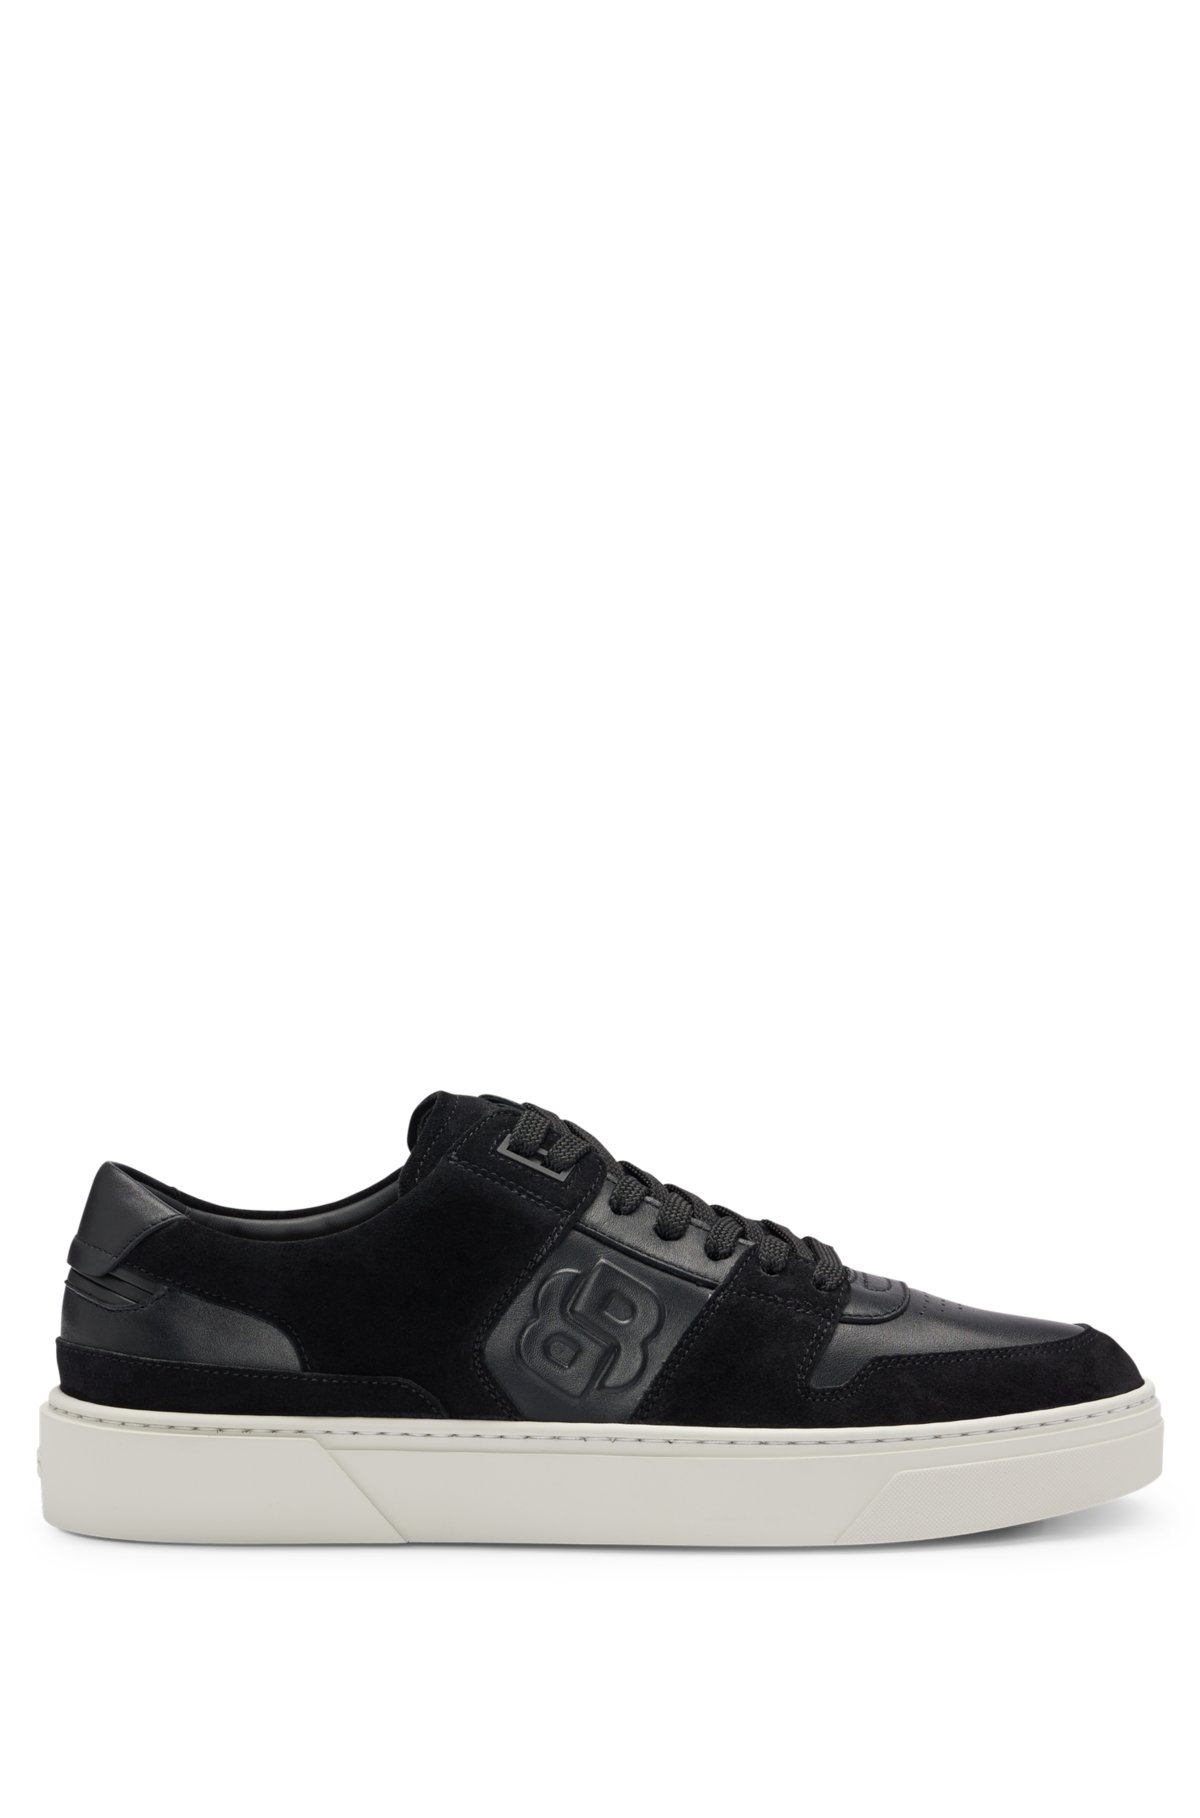 Gary double-monogram trainers in suede and leather, Black